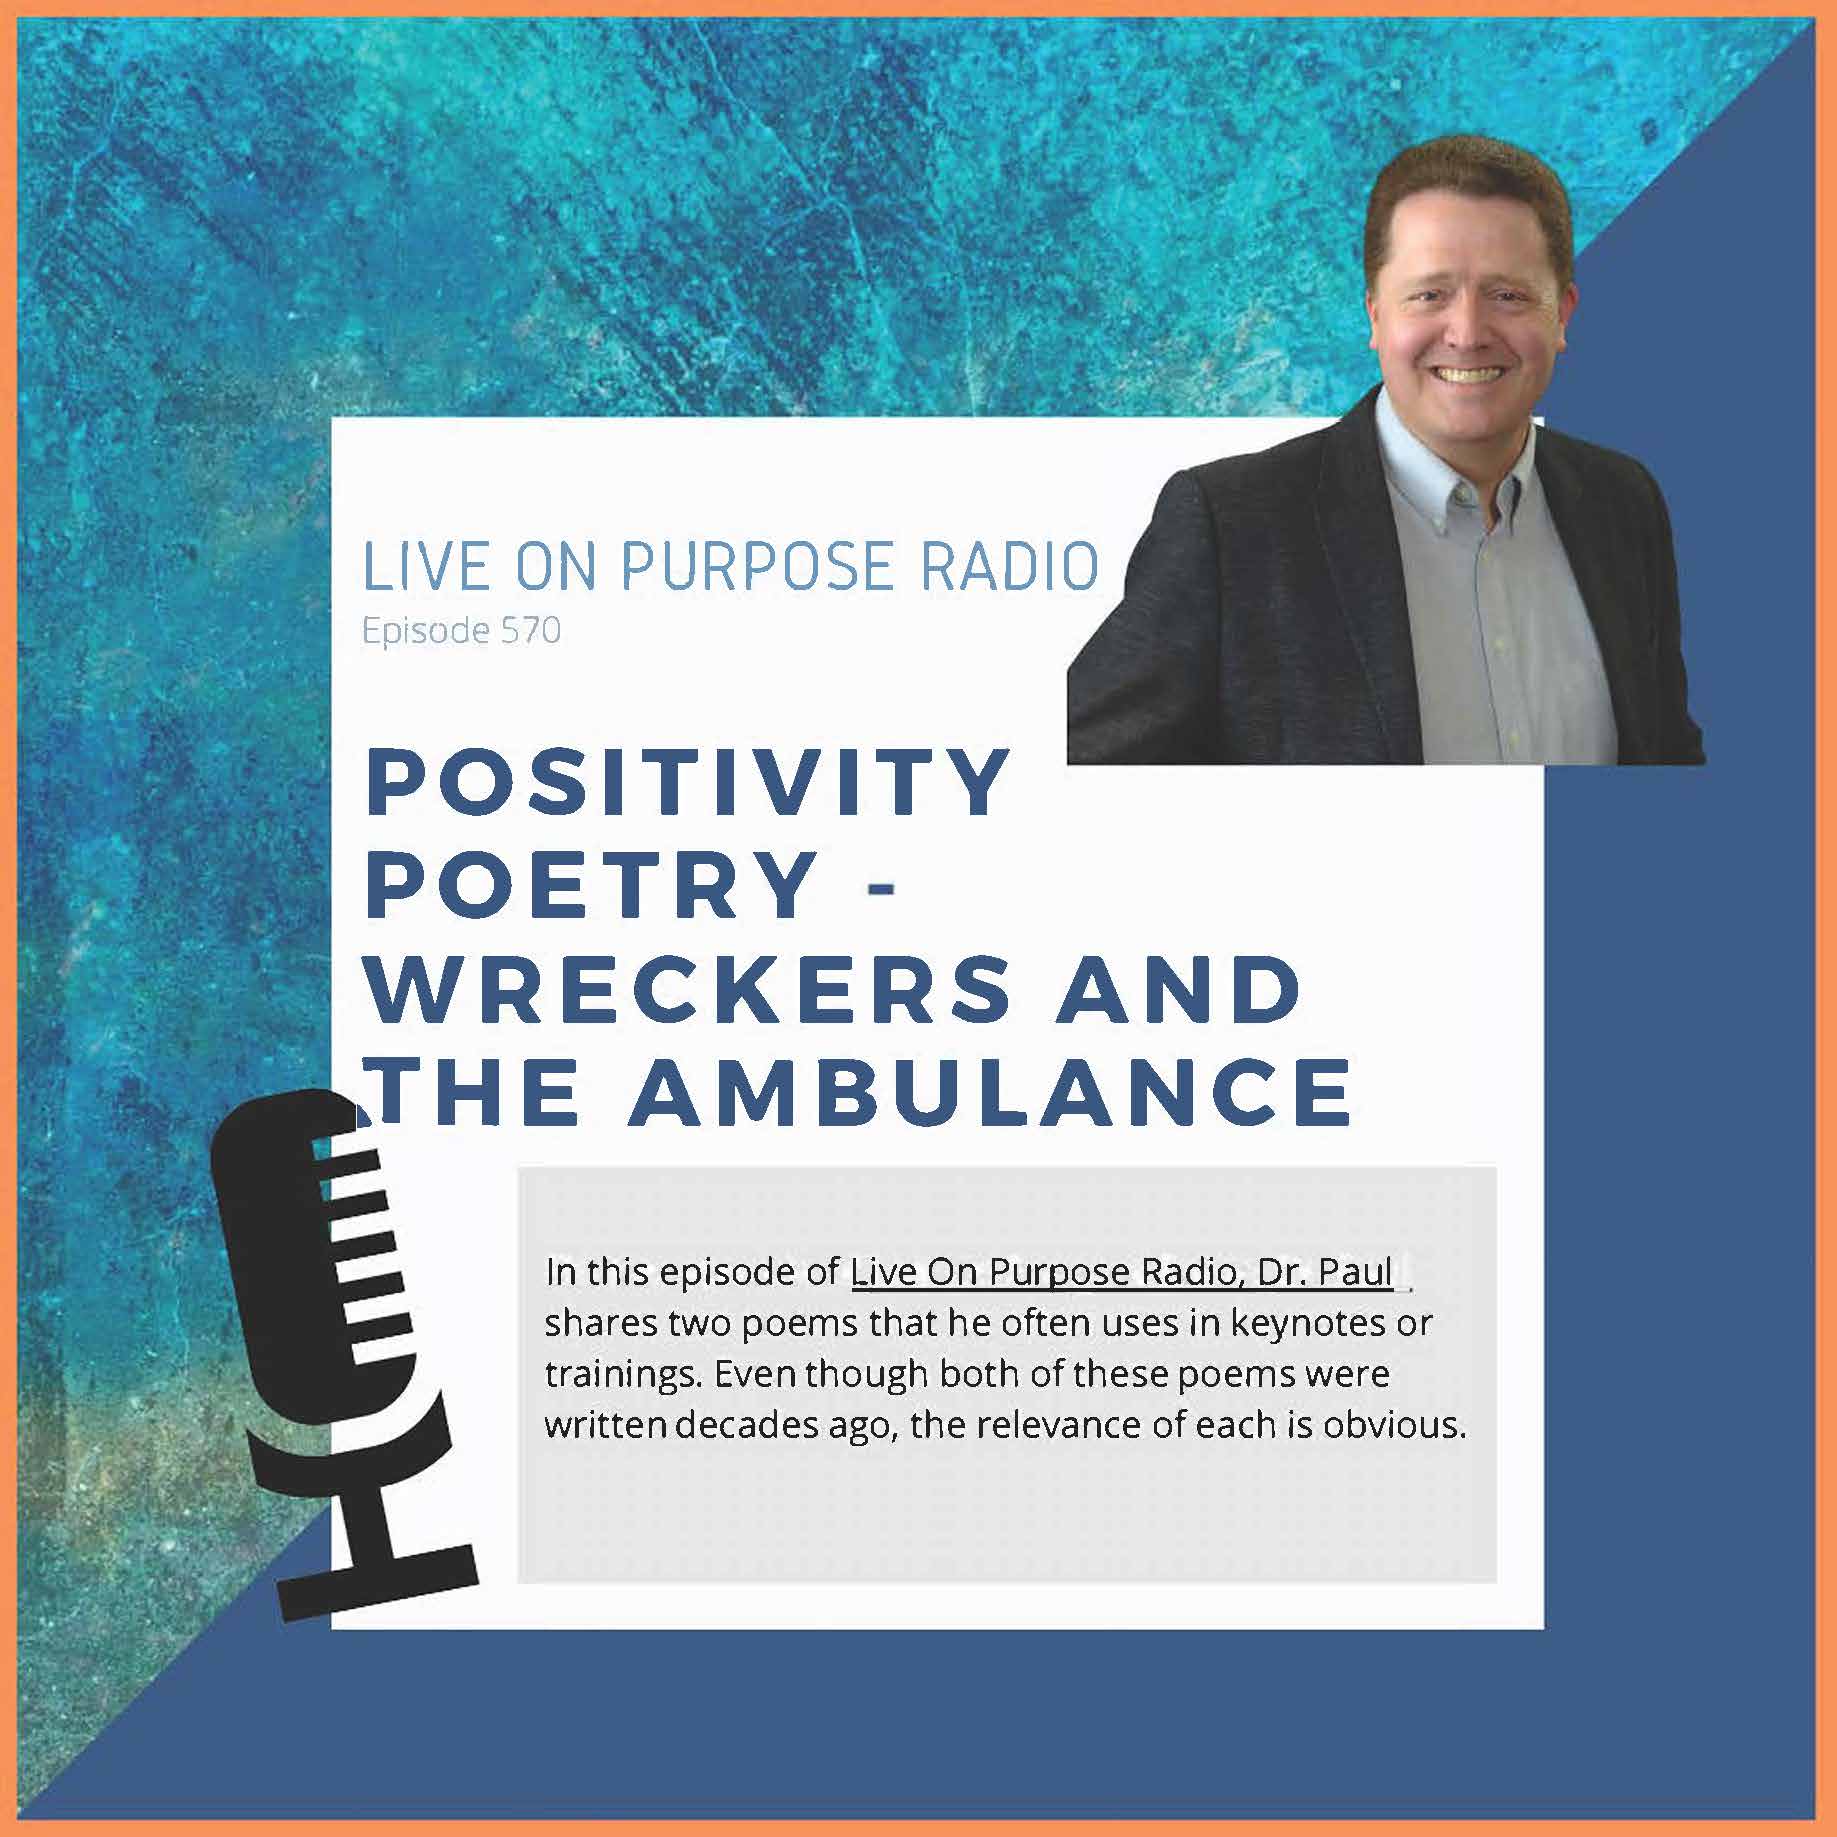 LIVE ON PURPOSE RADIO Episode 570 POSITIVITY POETRY - WRECKERS AND THE AMBULANCE In this episode of Live On Purpose Radio, Dr. Paul shares two poems that he often uses in keynotes or trainings. Even though both of these poems were written decades ago, the relevance of each is obvious.